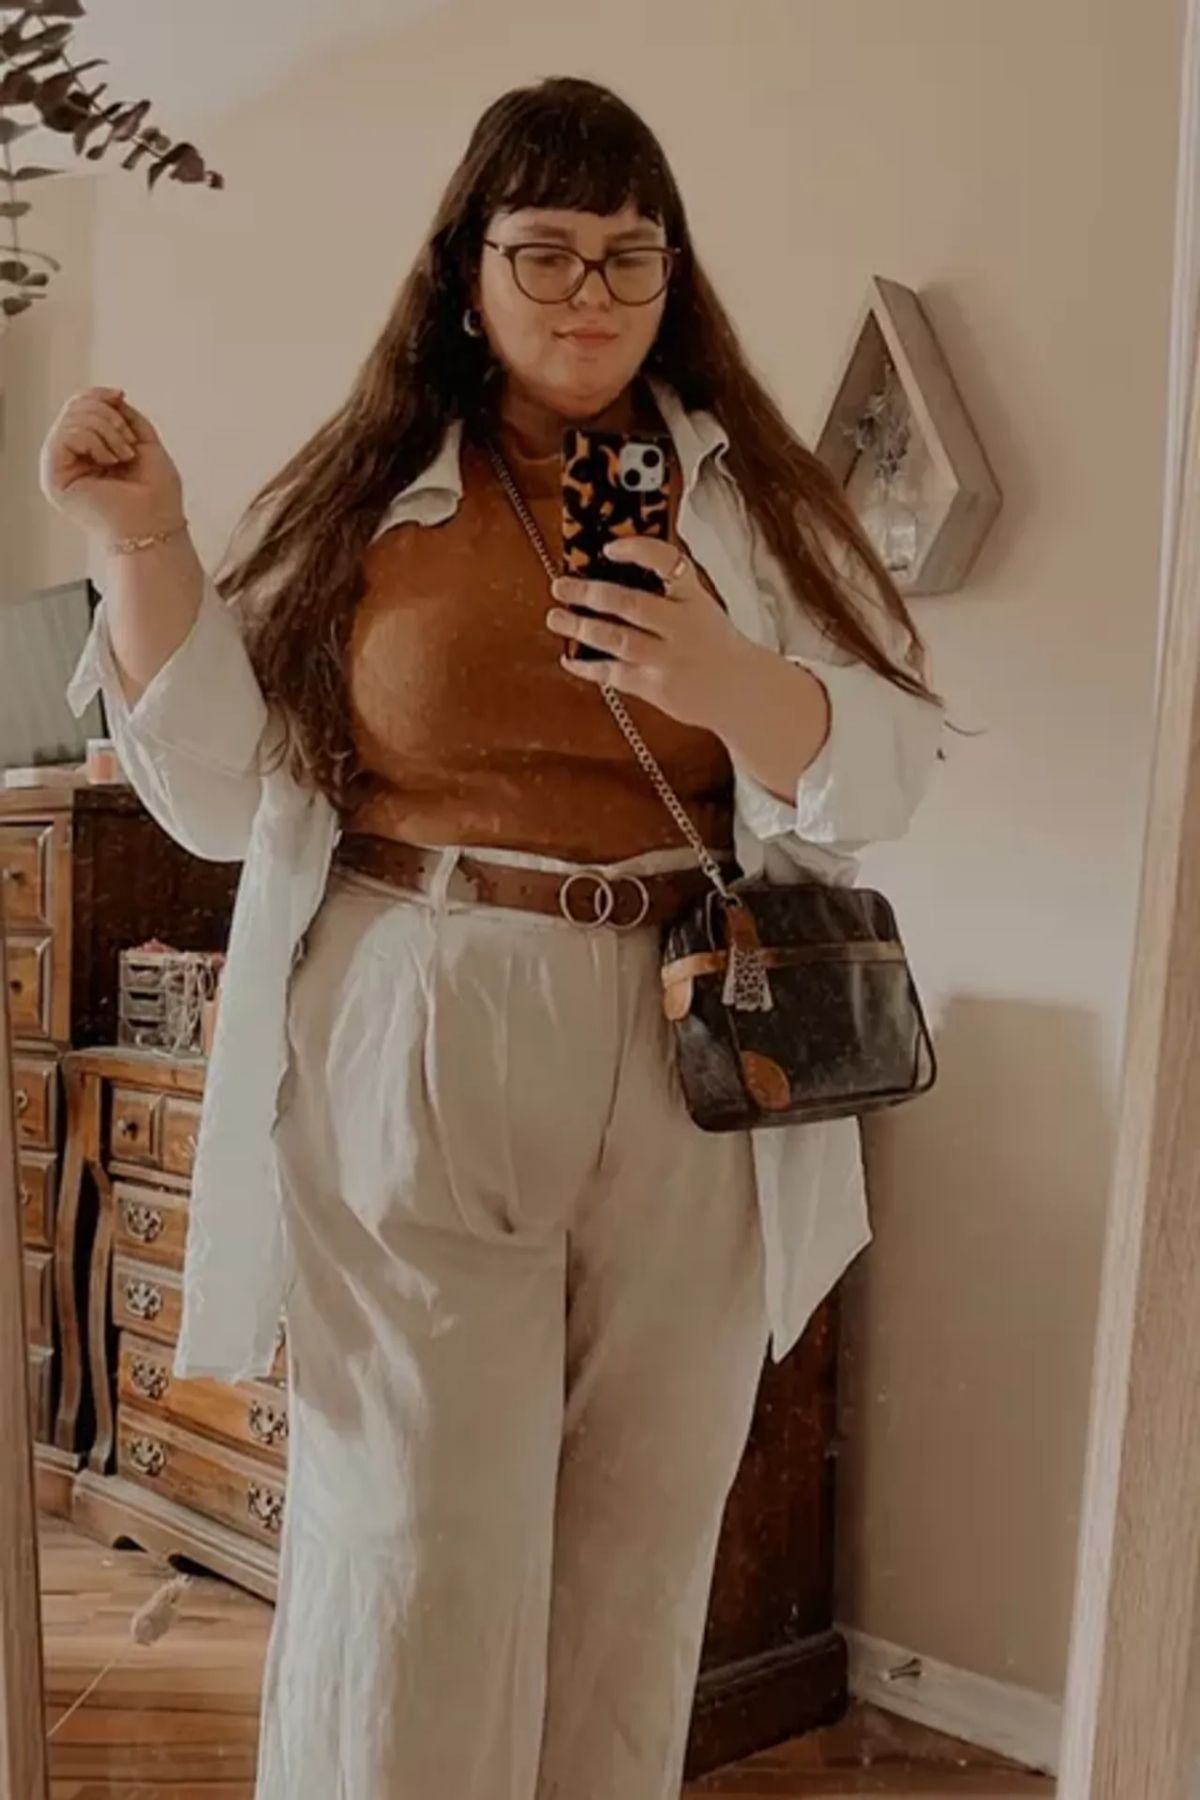 Layering with warm-toned top, crisp white overshirt, high-waisted trousers, belt.